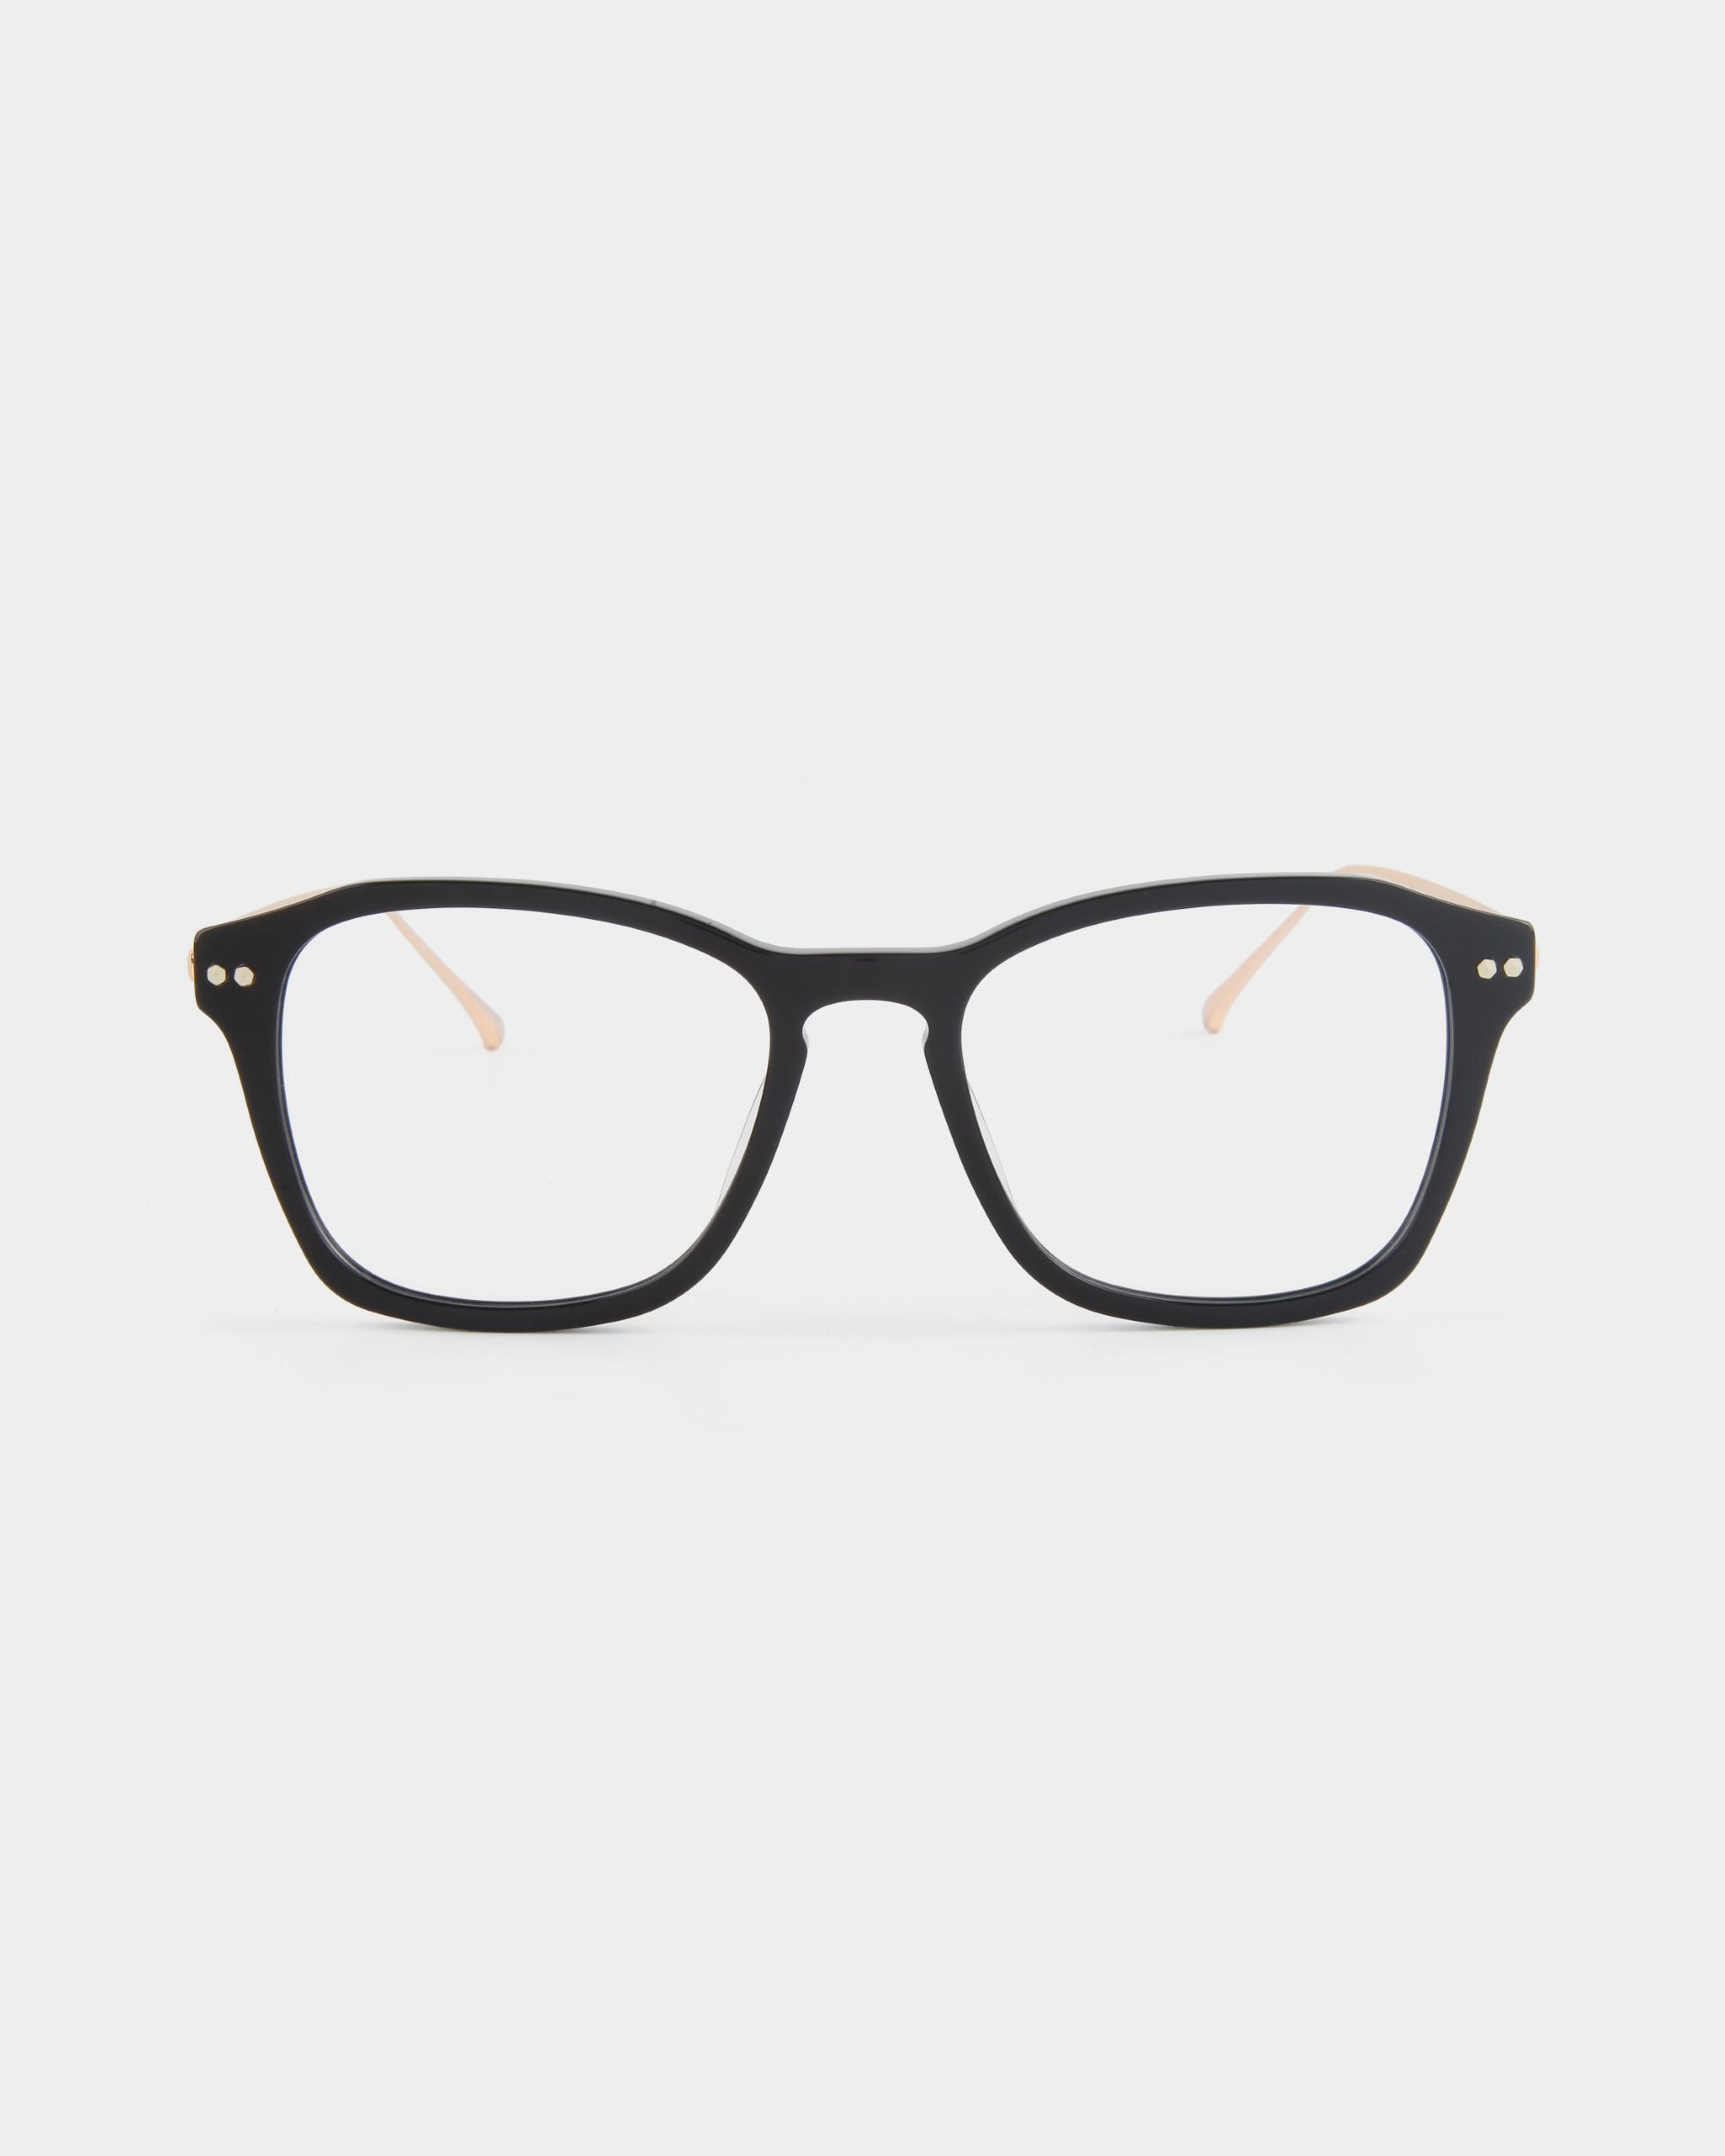 Black rectangular eyeglasses, named "Morris" by For Art's Sake®, with a glossy finish are shown against a plain white background. The glasses feature subtle metallic details on the upper corners of the stainless steel frames and thin, light-colored temple arms.